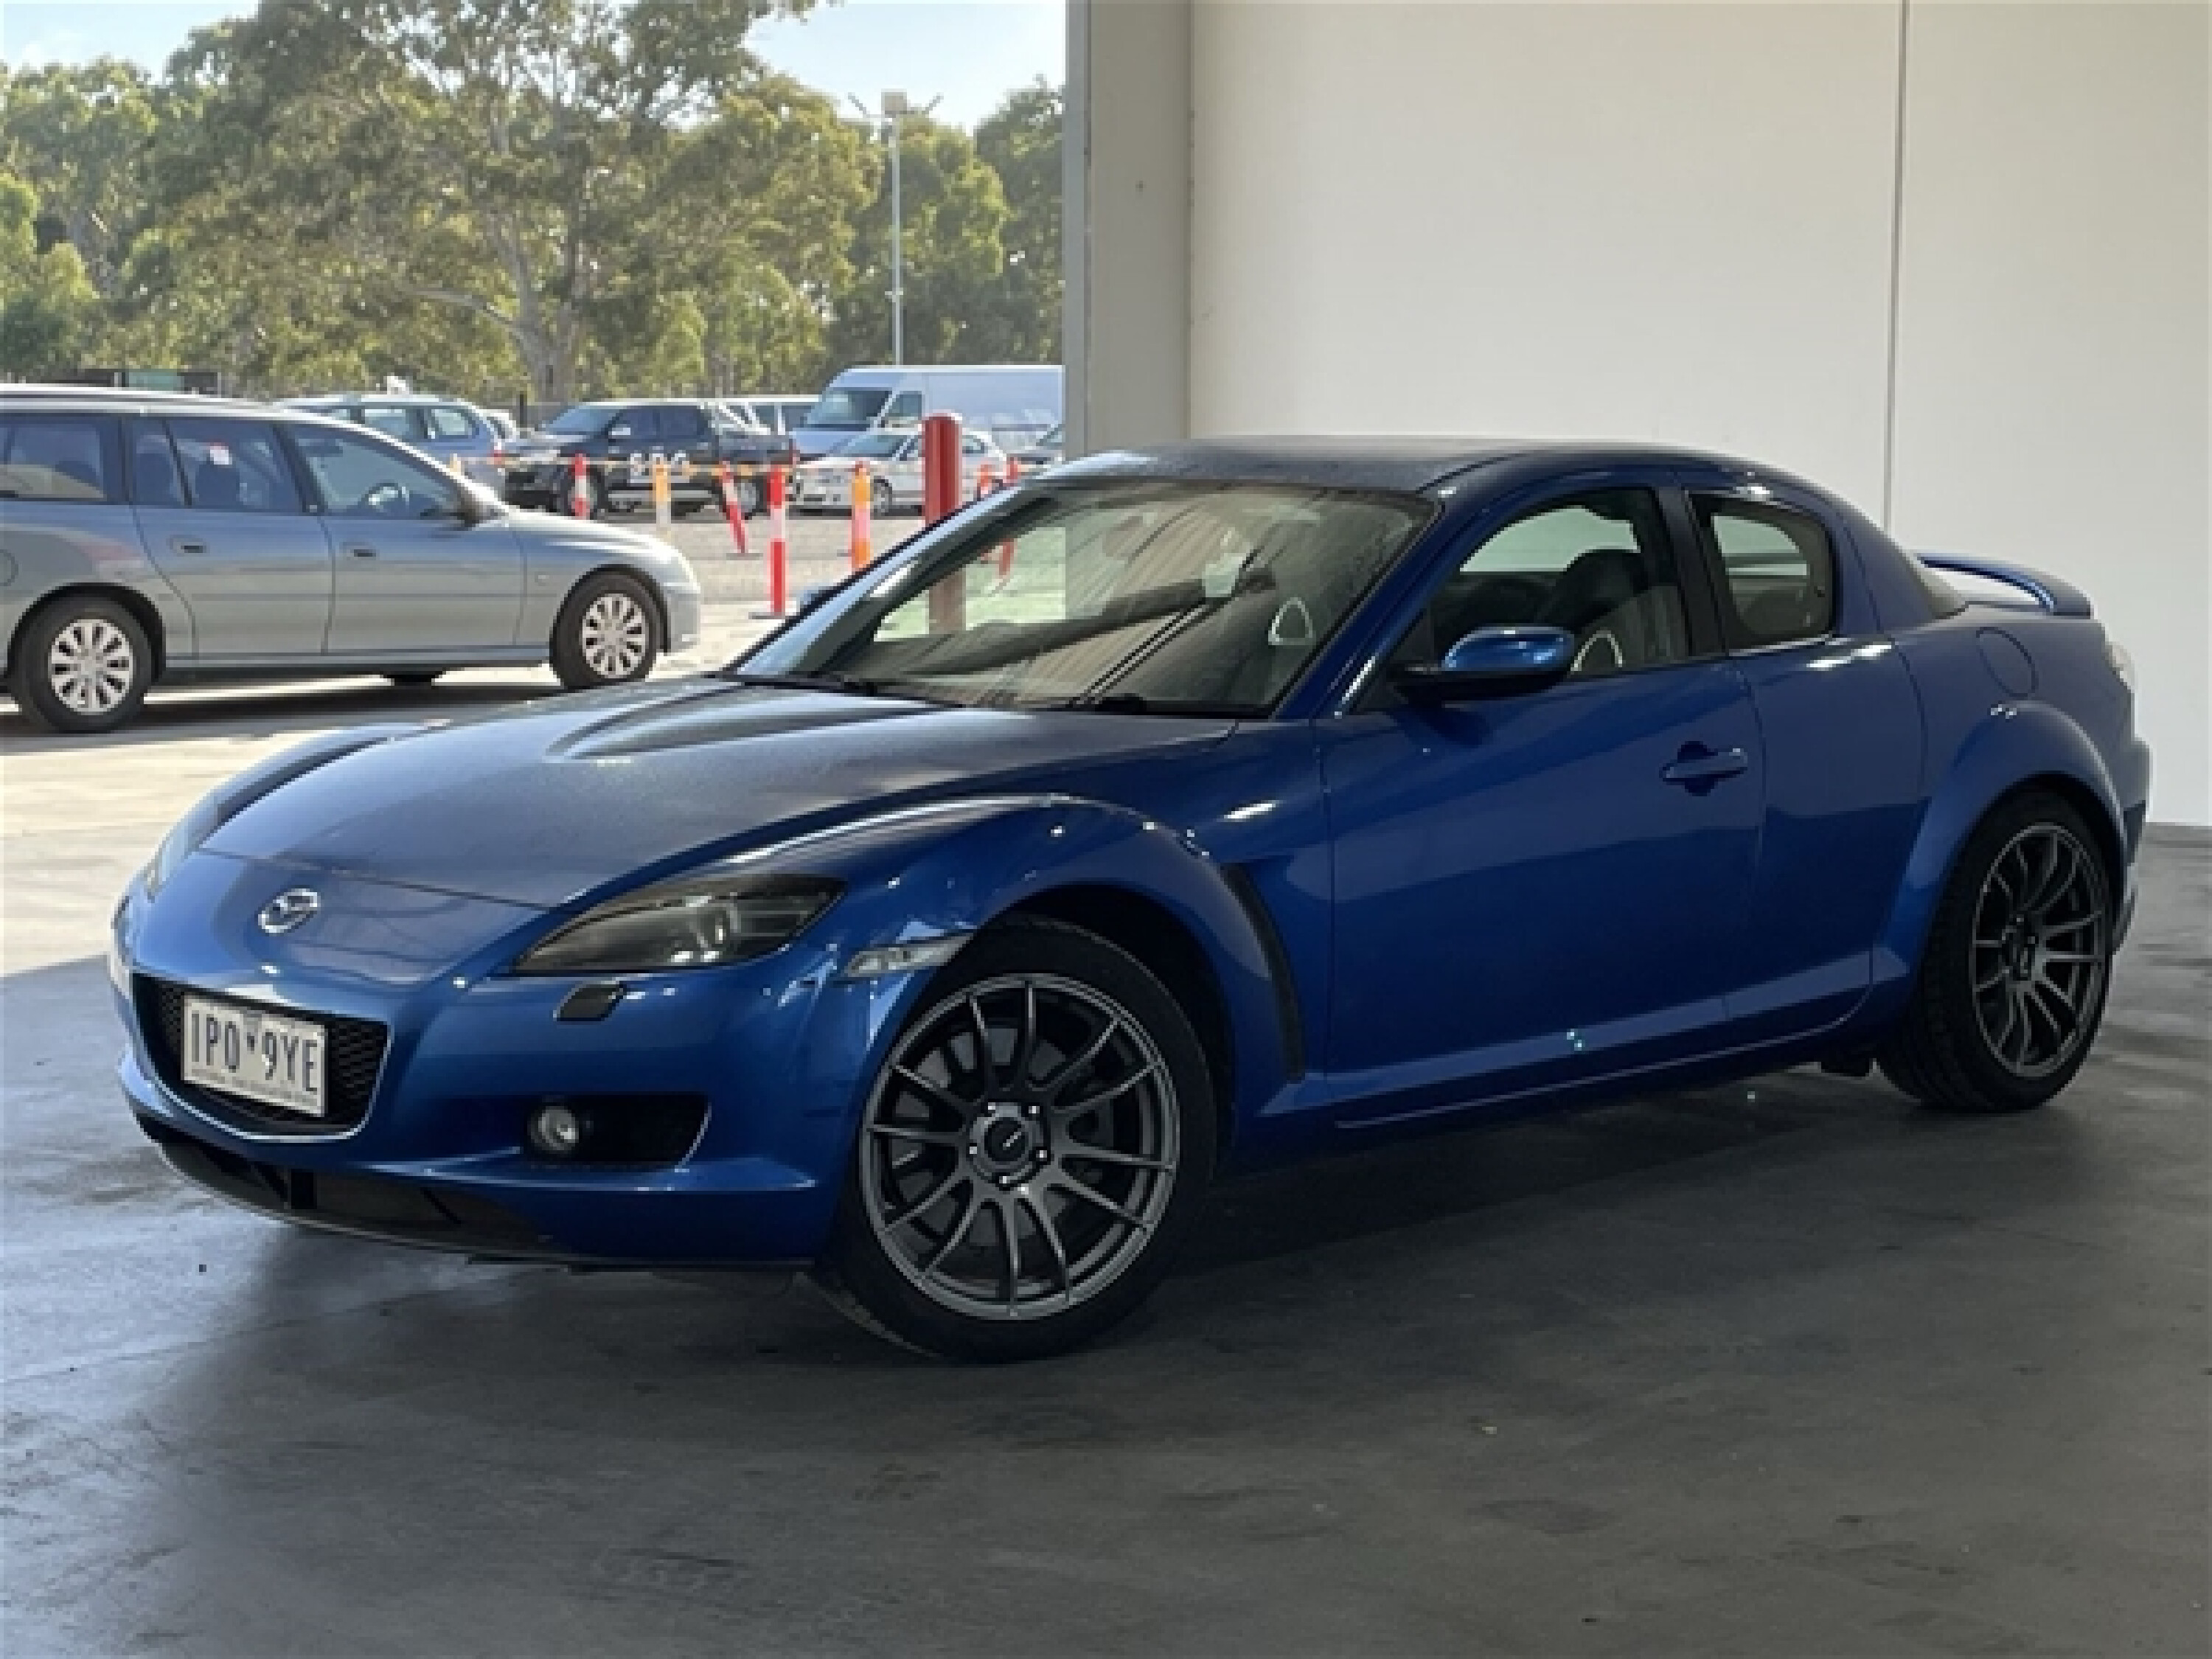 62cd1784/2003 mazda rx8 coupe manual grays auction 1 jpg